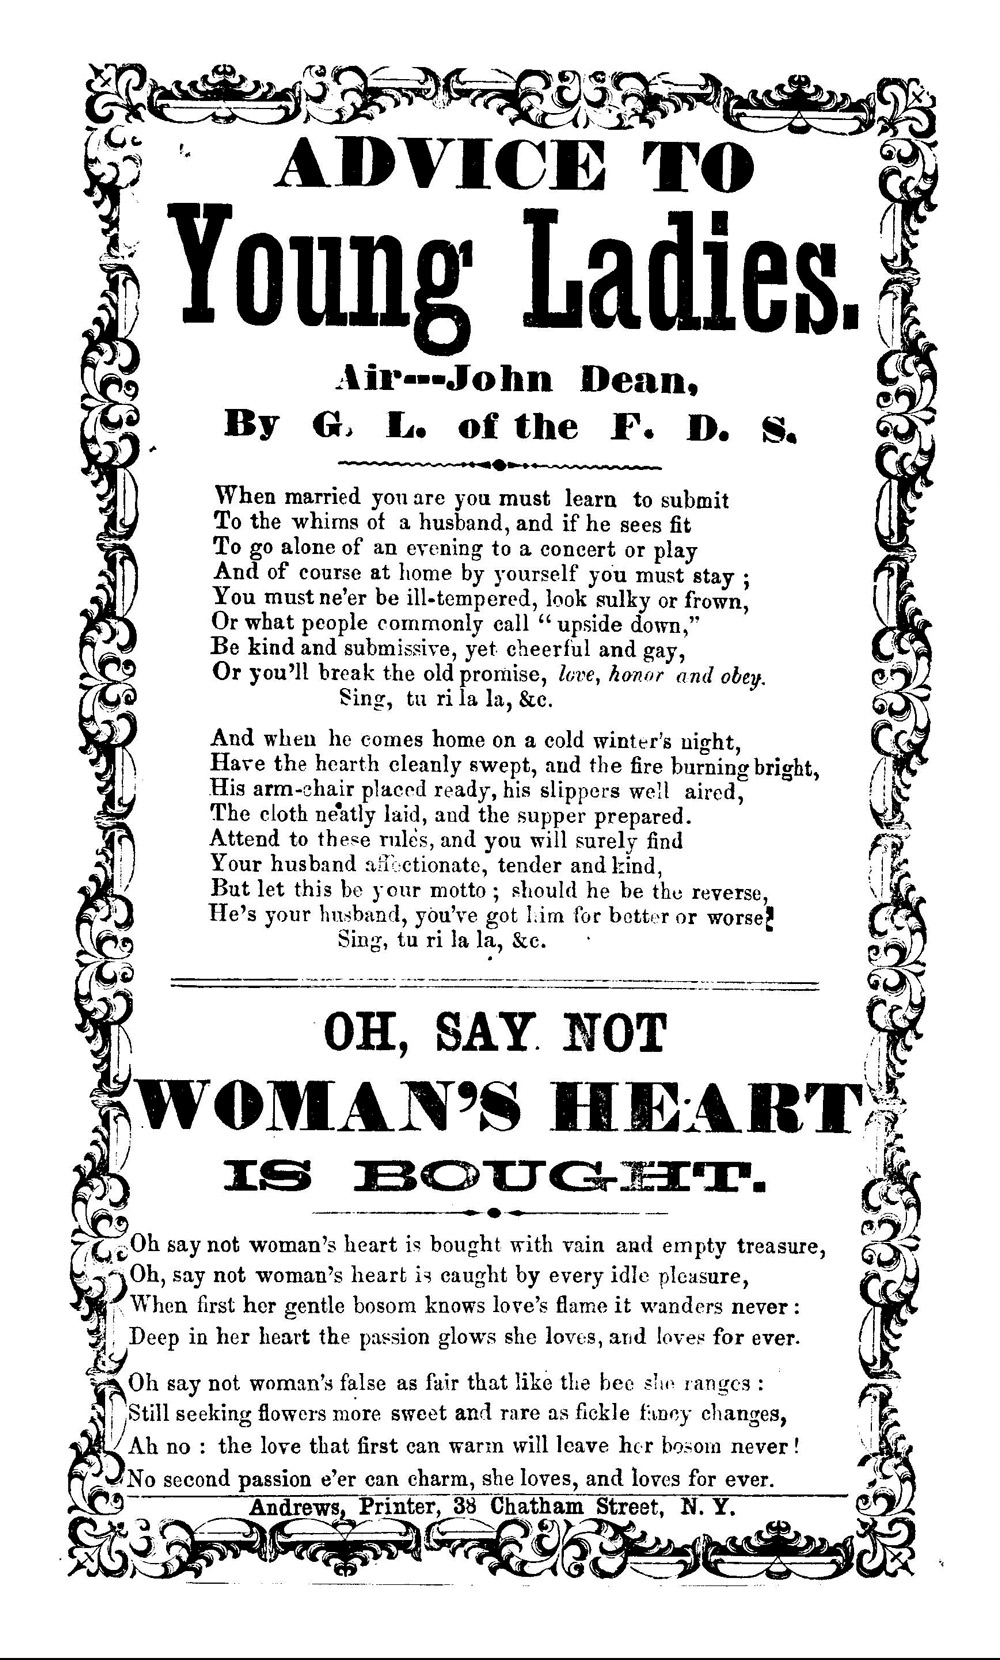 Courtesy of Library of Congress, "Advice to young ladies. Air---John Dean. Andrews, Printer, 38 Chatham Street, N.Y.," Date Unknown